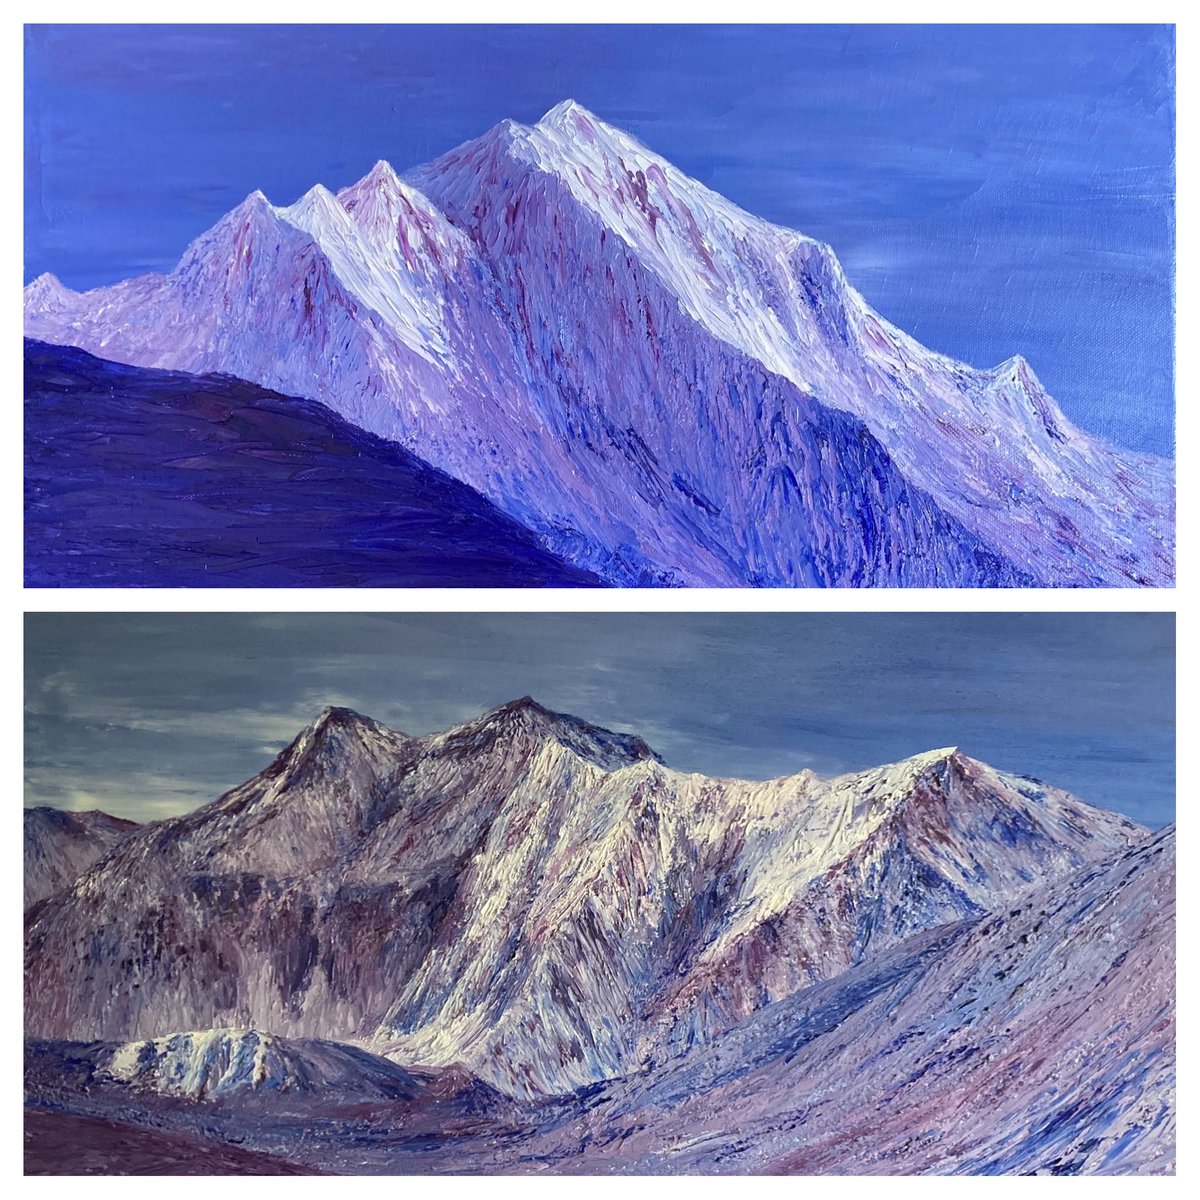 Rakaposhi and Nanga Parbat. I’m up against it with writing deadlines at the moment. No time to paint but I really want to start another similar to these in style. Soon!